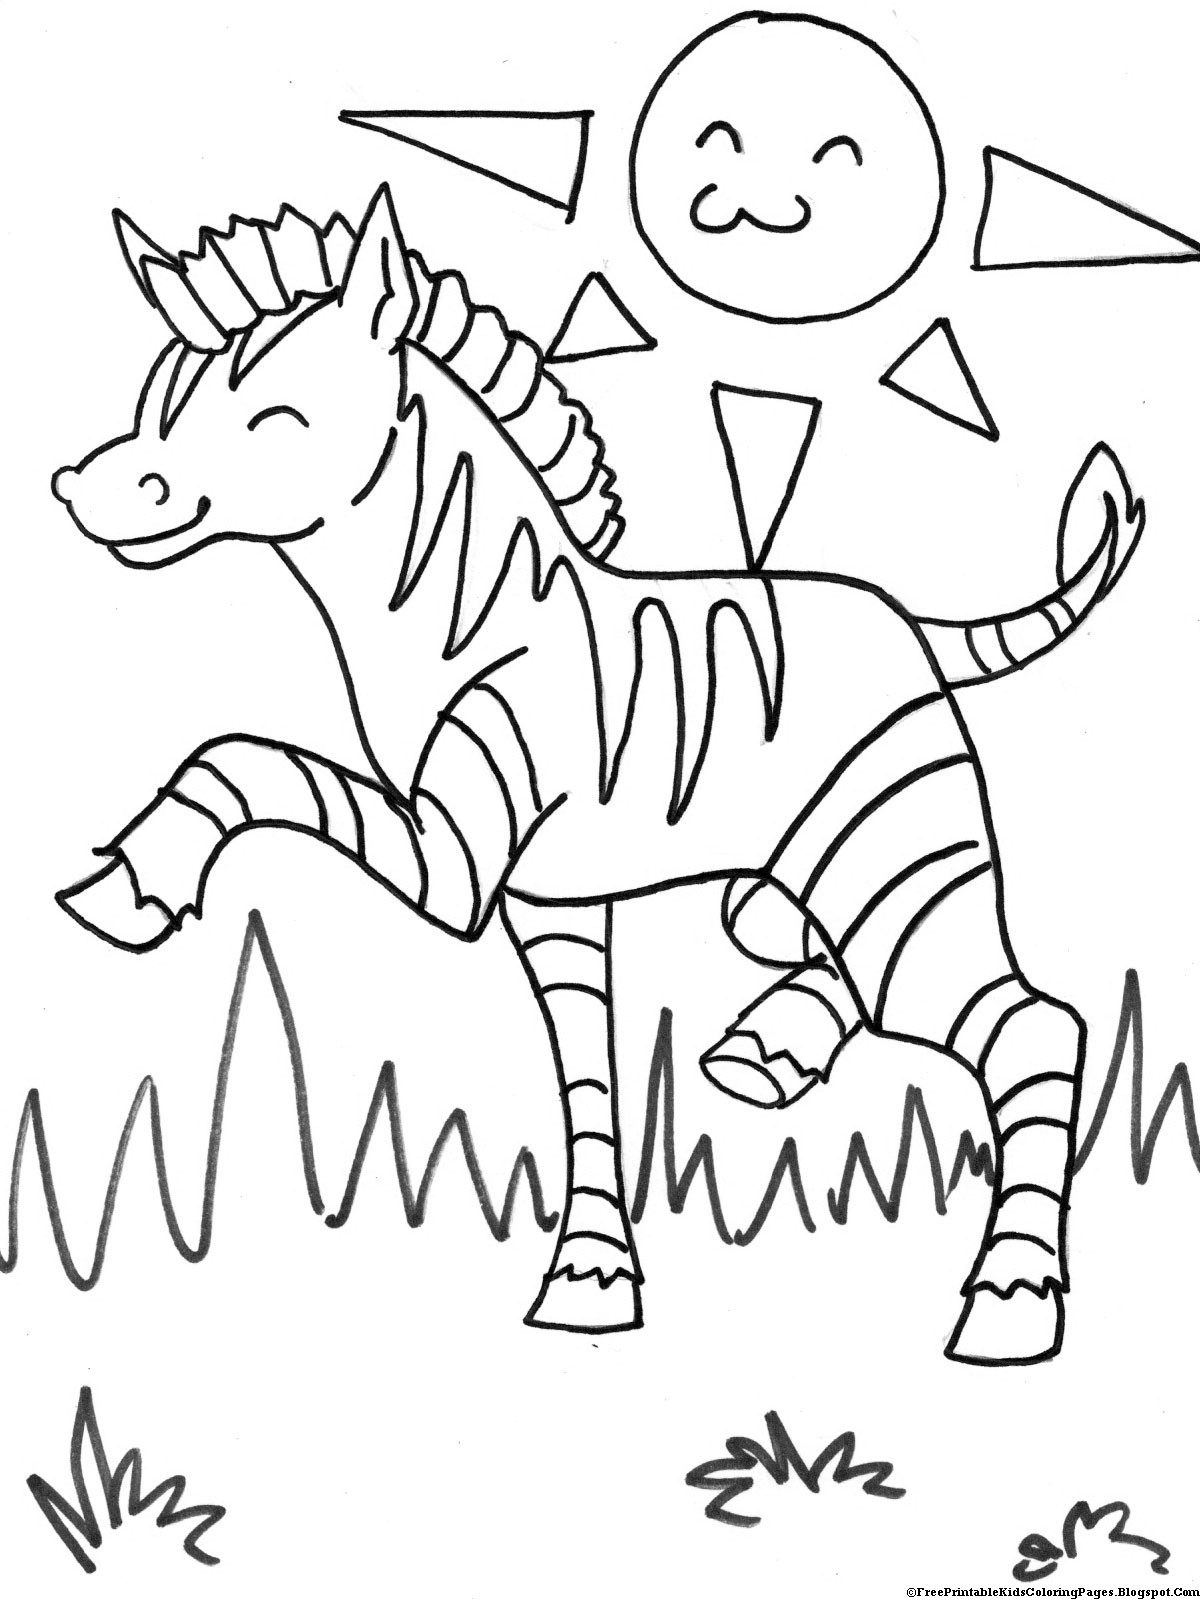 Coloring-Pages-Kids
 Zebra Coloring Pages Free Printable Kids Coloring Pages